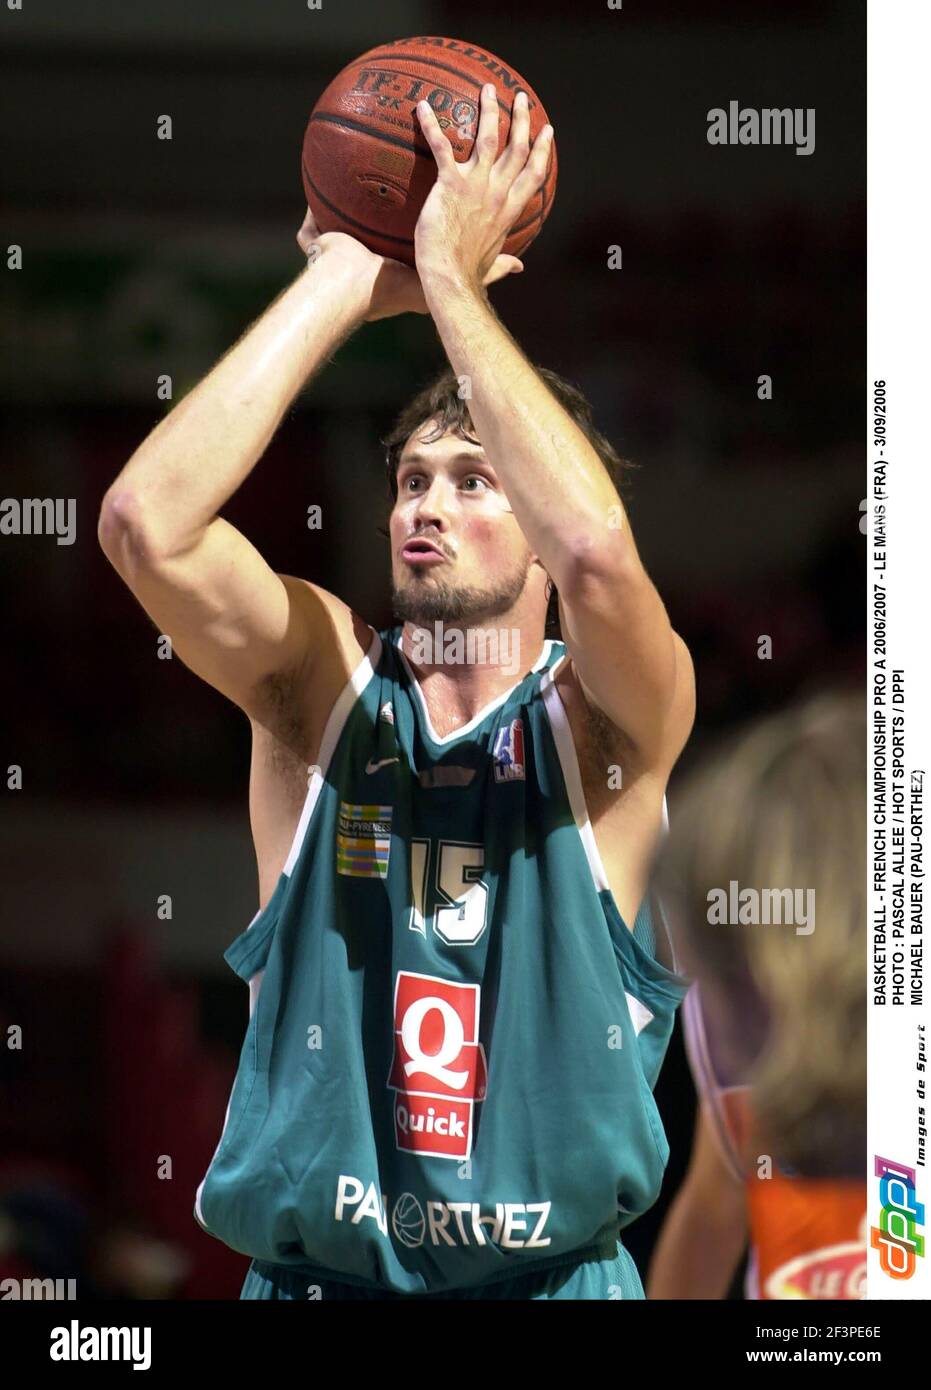 BASKETBALL - FRENCH CHAMPIONSHIP PRO A 2006/2007 - LE MANS (FRA) -  3/09/2006 PHOTO : PASCAL ALLEE / HOT SPORTS / DPPI MICHAEL BAUER  (PAU-ORTHEZ) 15 Michael BAUER PAU ORTHEZ 2006/2007 Photo Pascal ALLEE/HOT  SPORTS © 2006 Stock Photo - Alamy